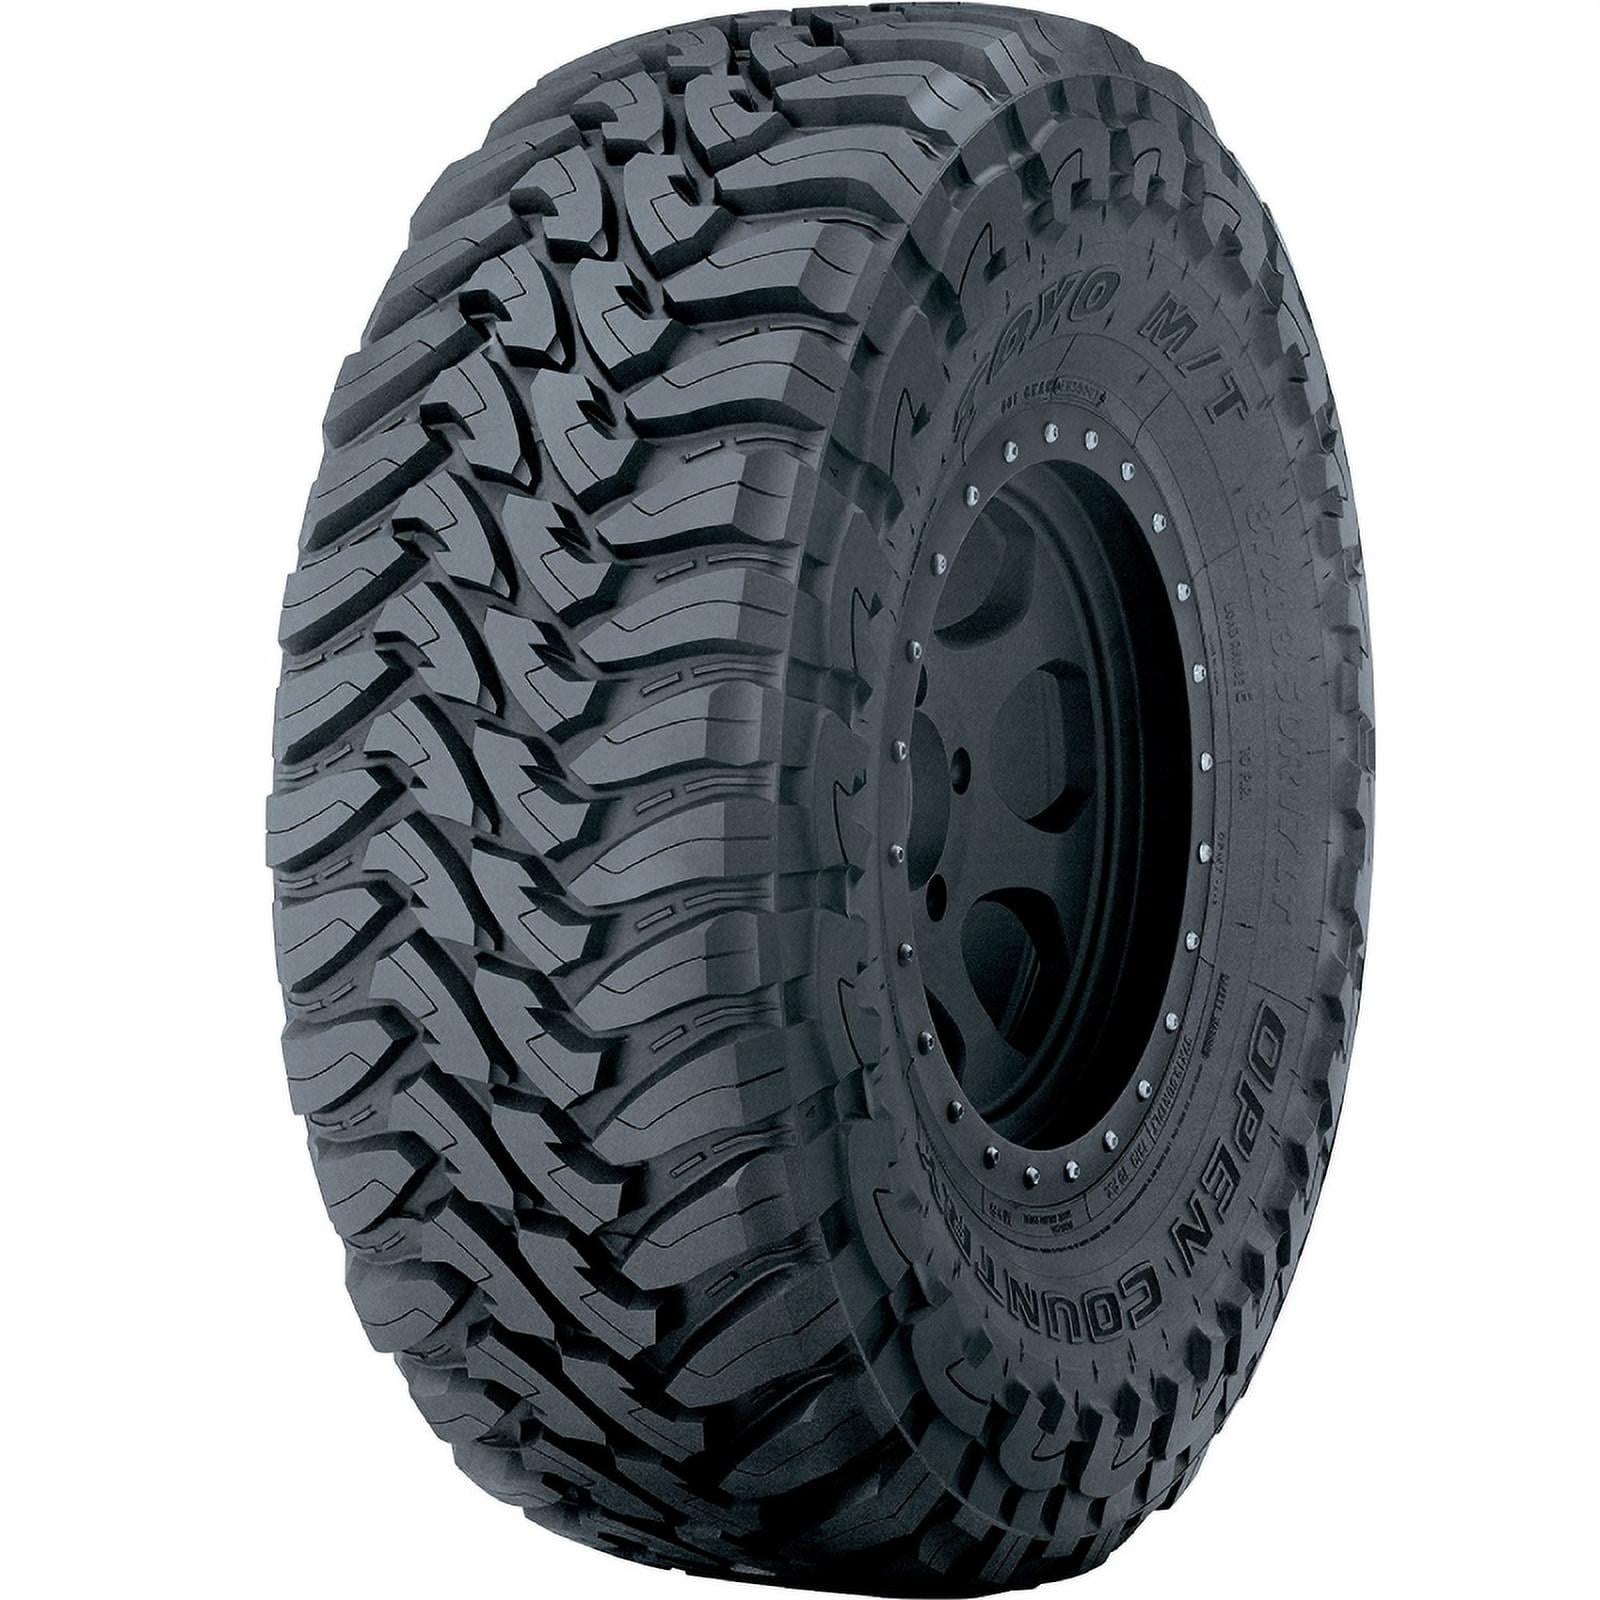 Toyo Open Country M/T LT275/65R18 123P E (10 ply) BW Tire